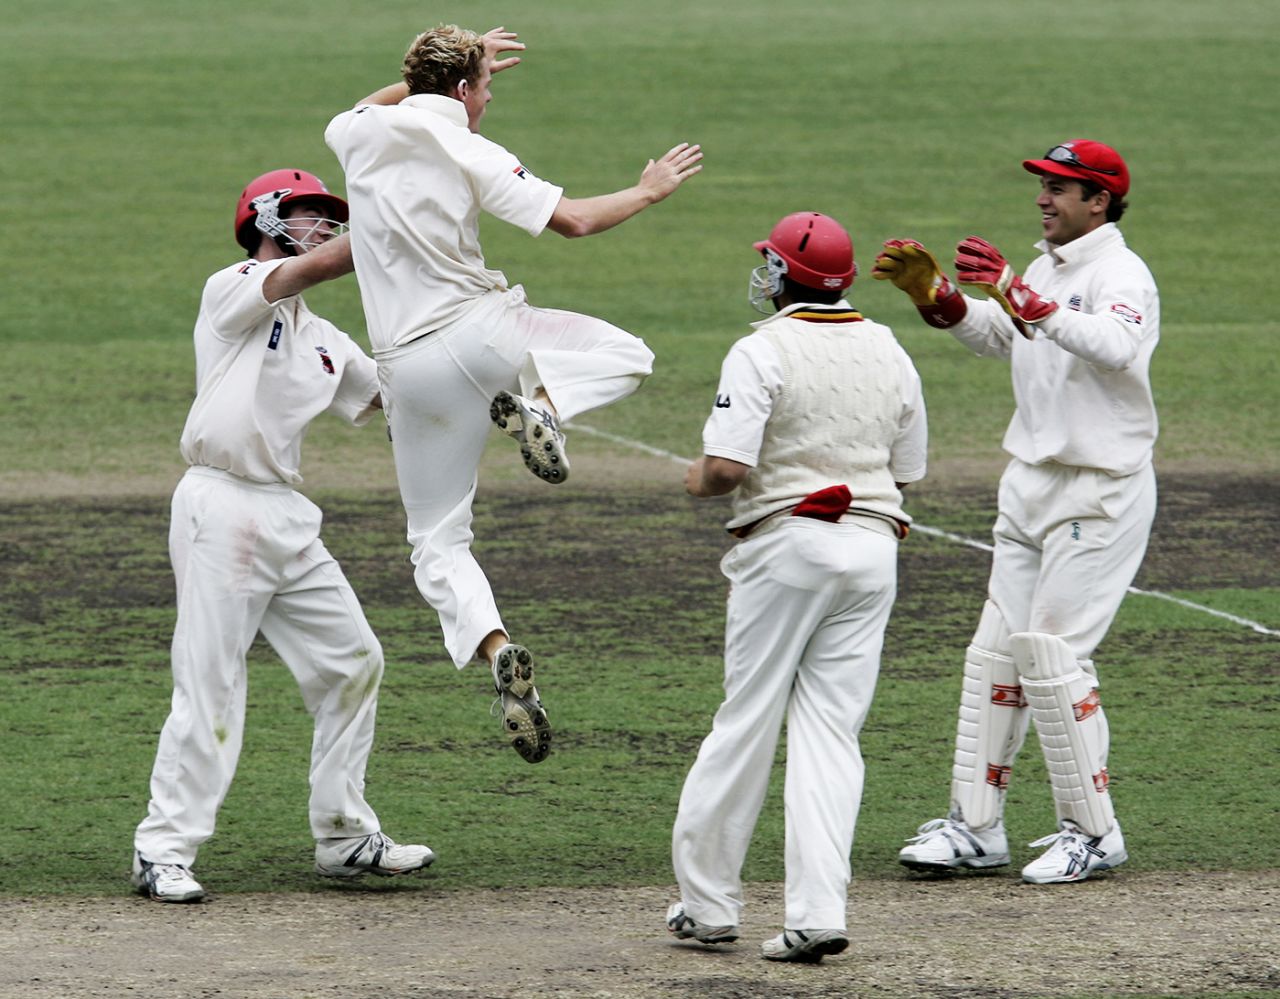 Dan Cullen celebrates a wicket, New South Wales v South Australia, Pura Cup, 1st day, Sydney, December 2, 2004